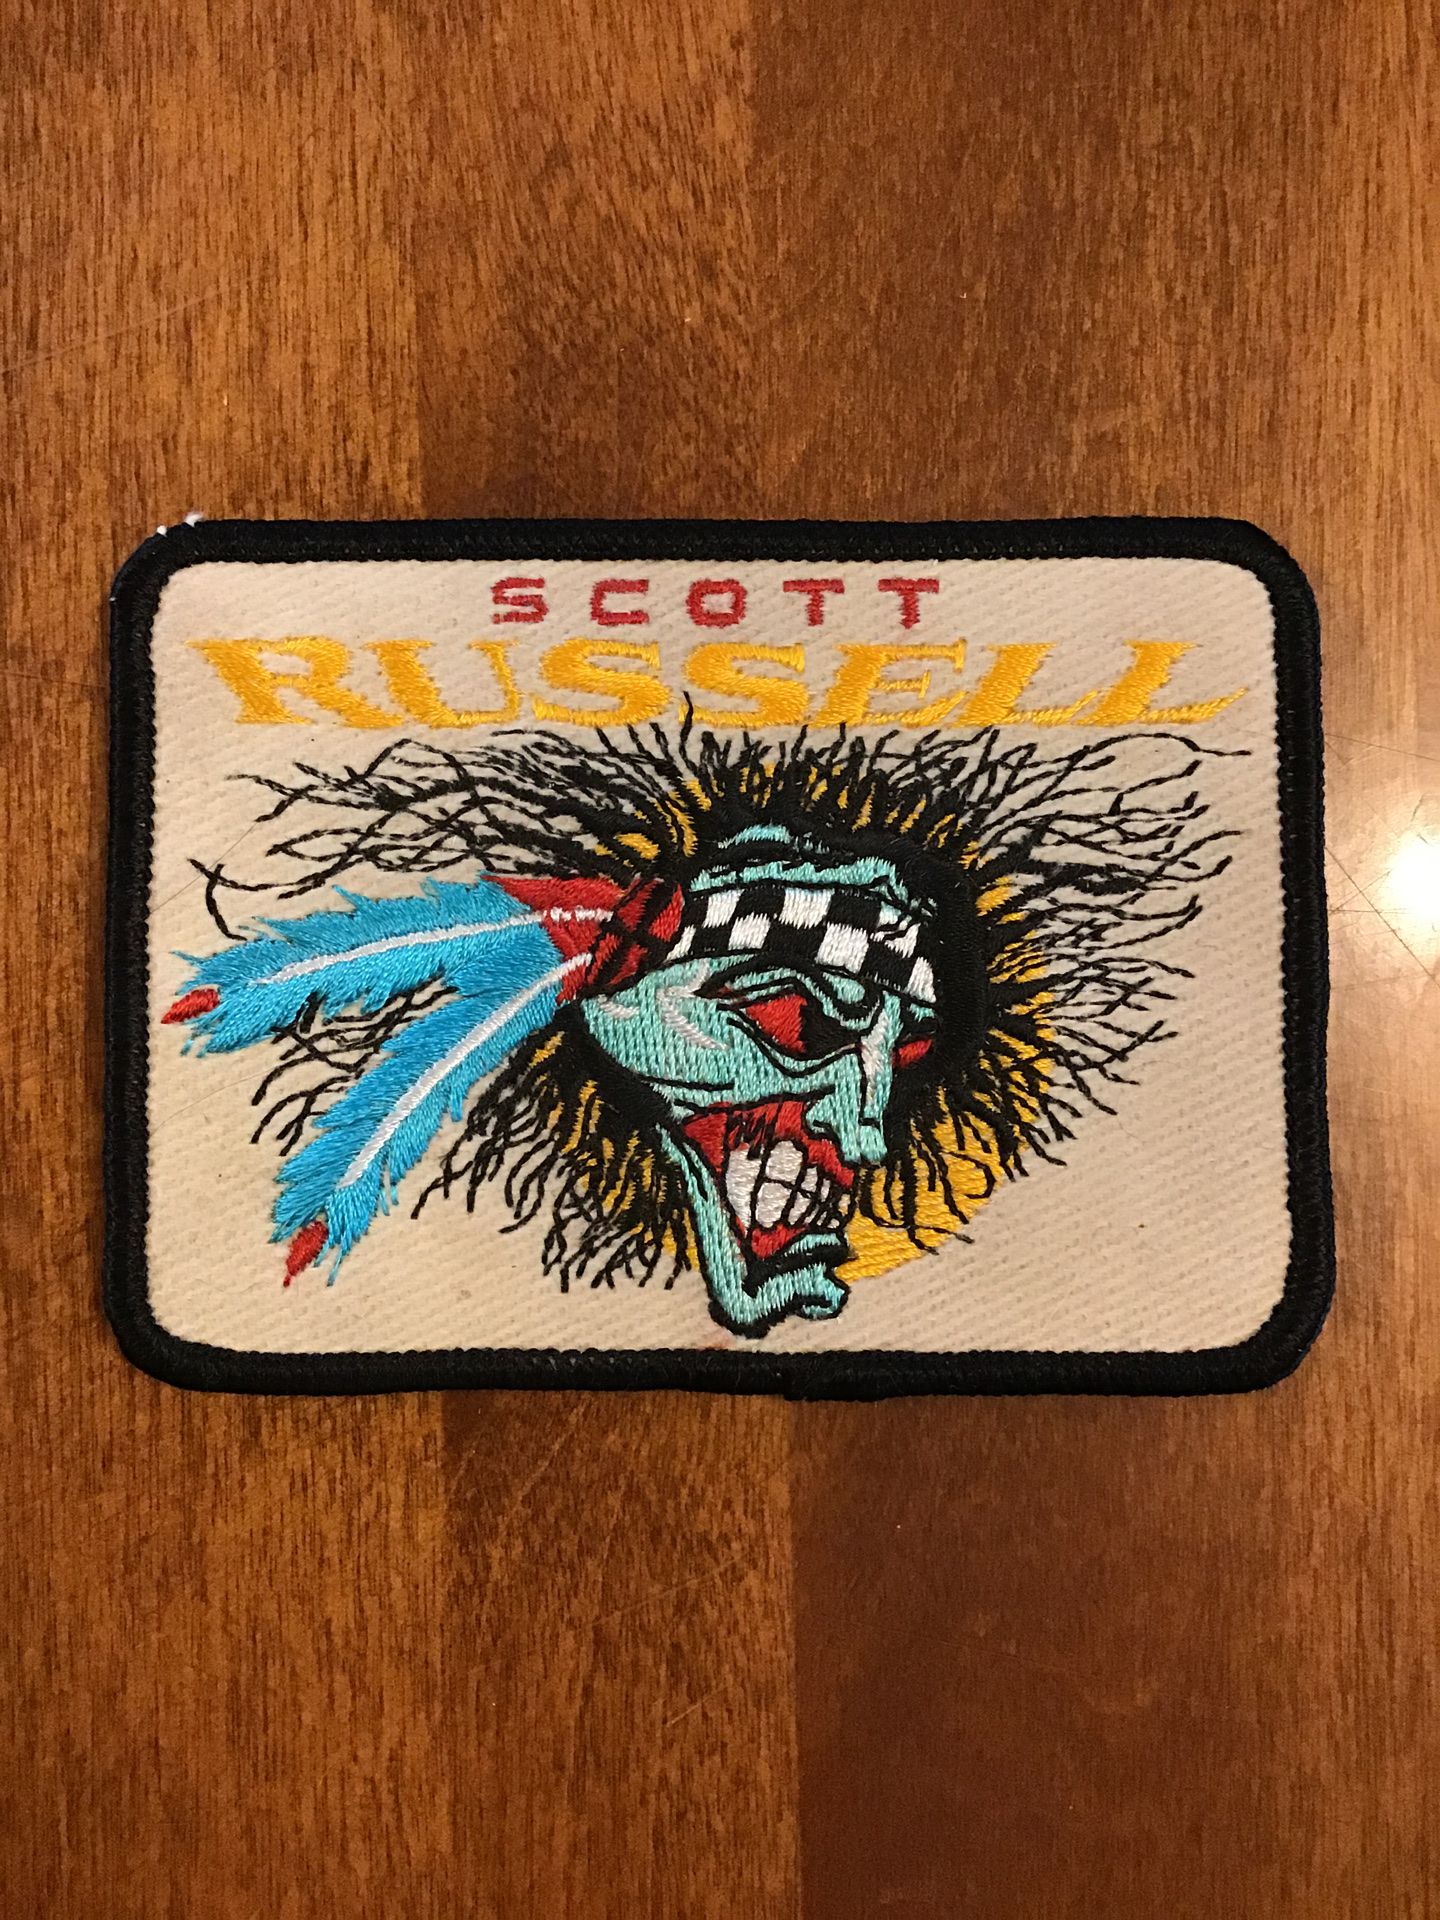 Scott Russell’s Motorcycle Icon on the Wild Indian Collectible Sew-on Patch.